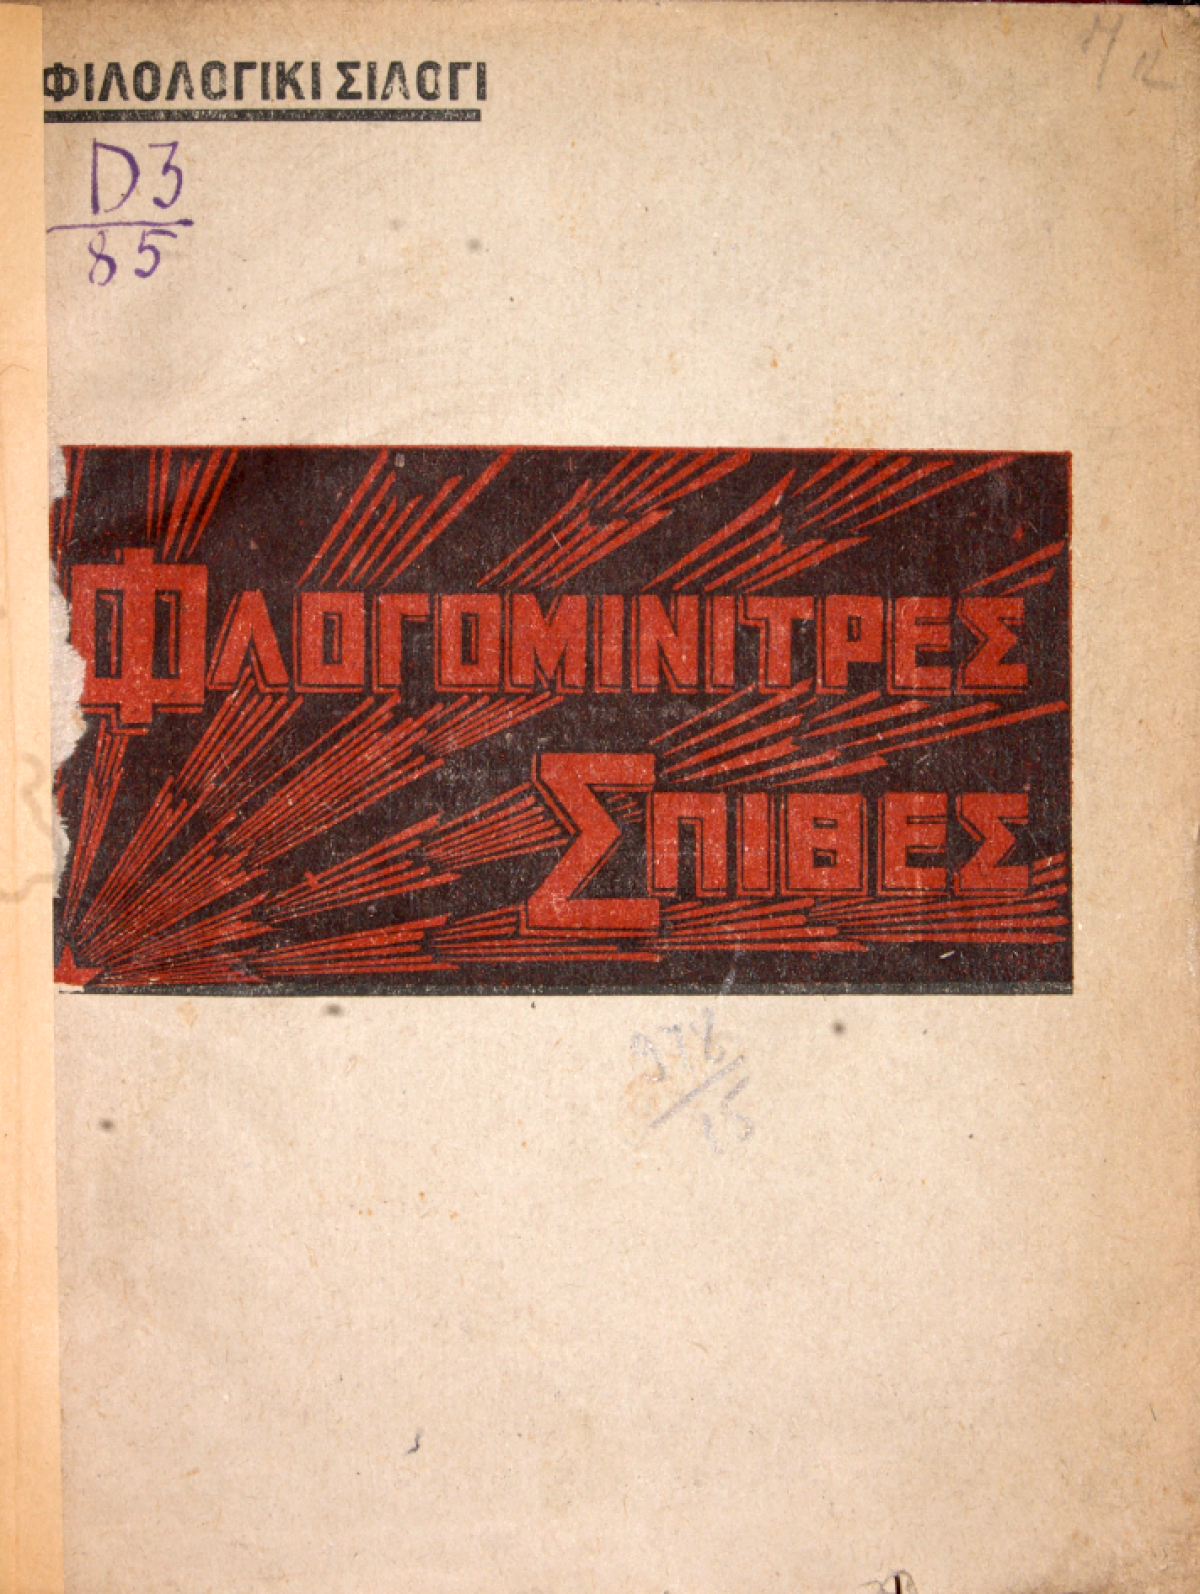 Cover of 1933 poetry collection Flogominitres spithes (Sparks that Foretell Flames)